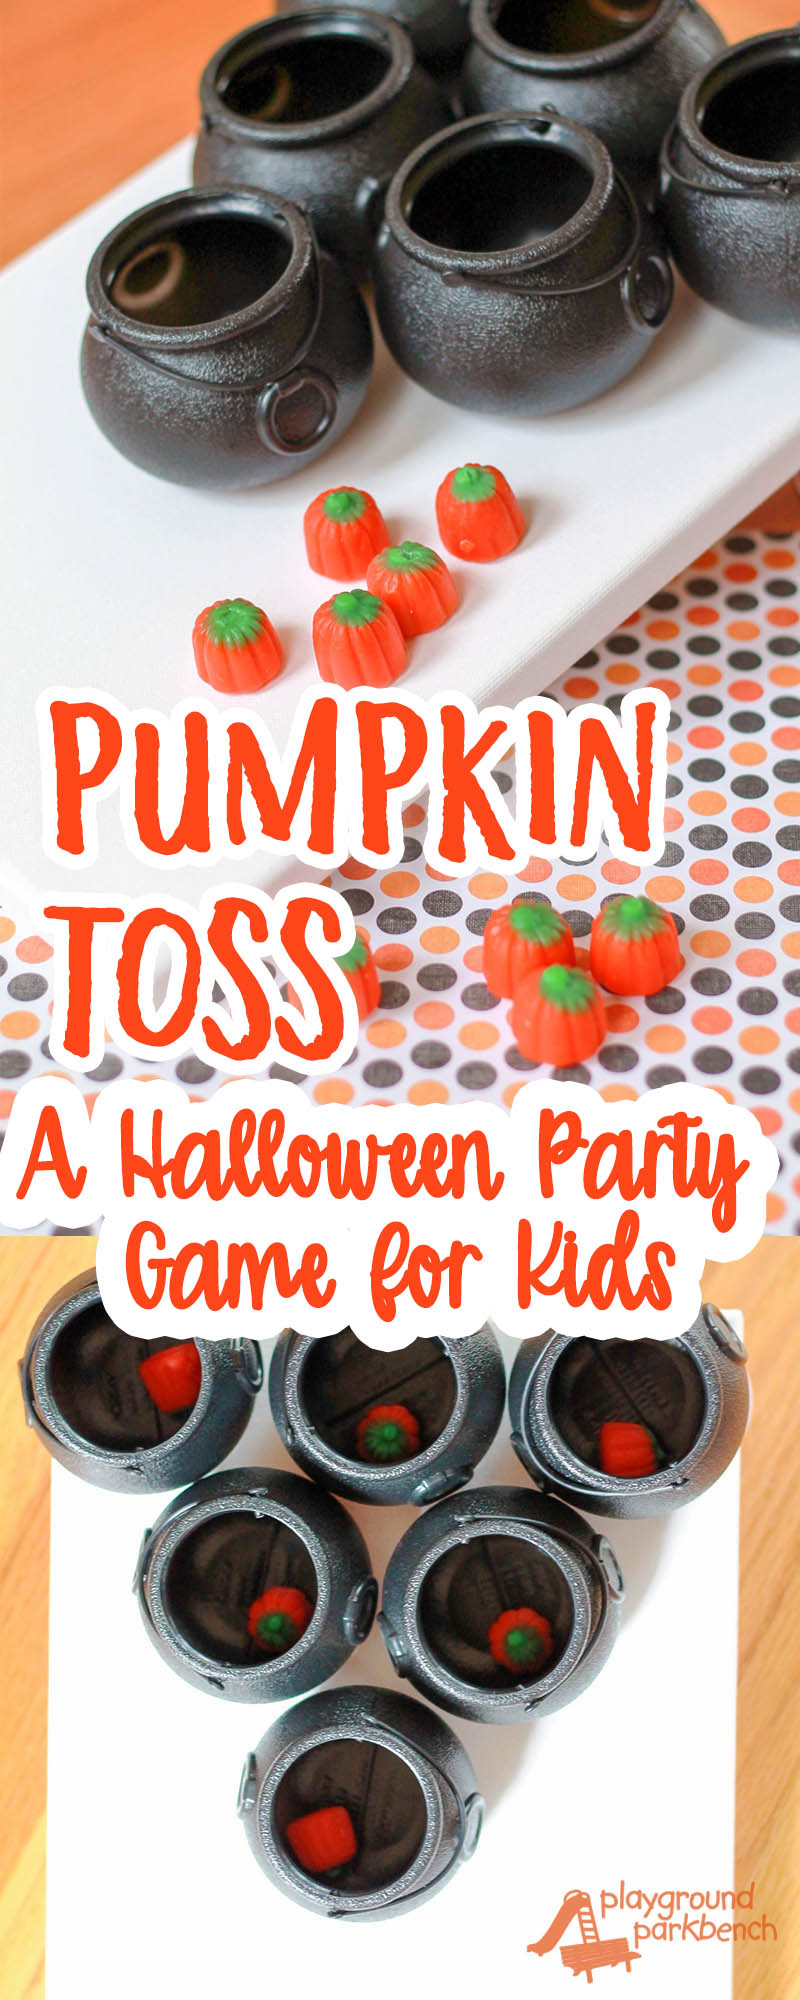 Work on fine and gross motor skills with play! A perfect addition to any preschool Halloween party or October child's birthday party, this simple game is fun for kids of all ages. | Pumpkins | Halloween | Party Games | Preschool | Games for Kids | 